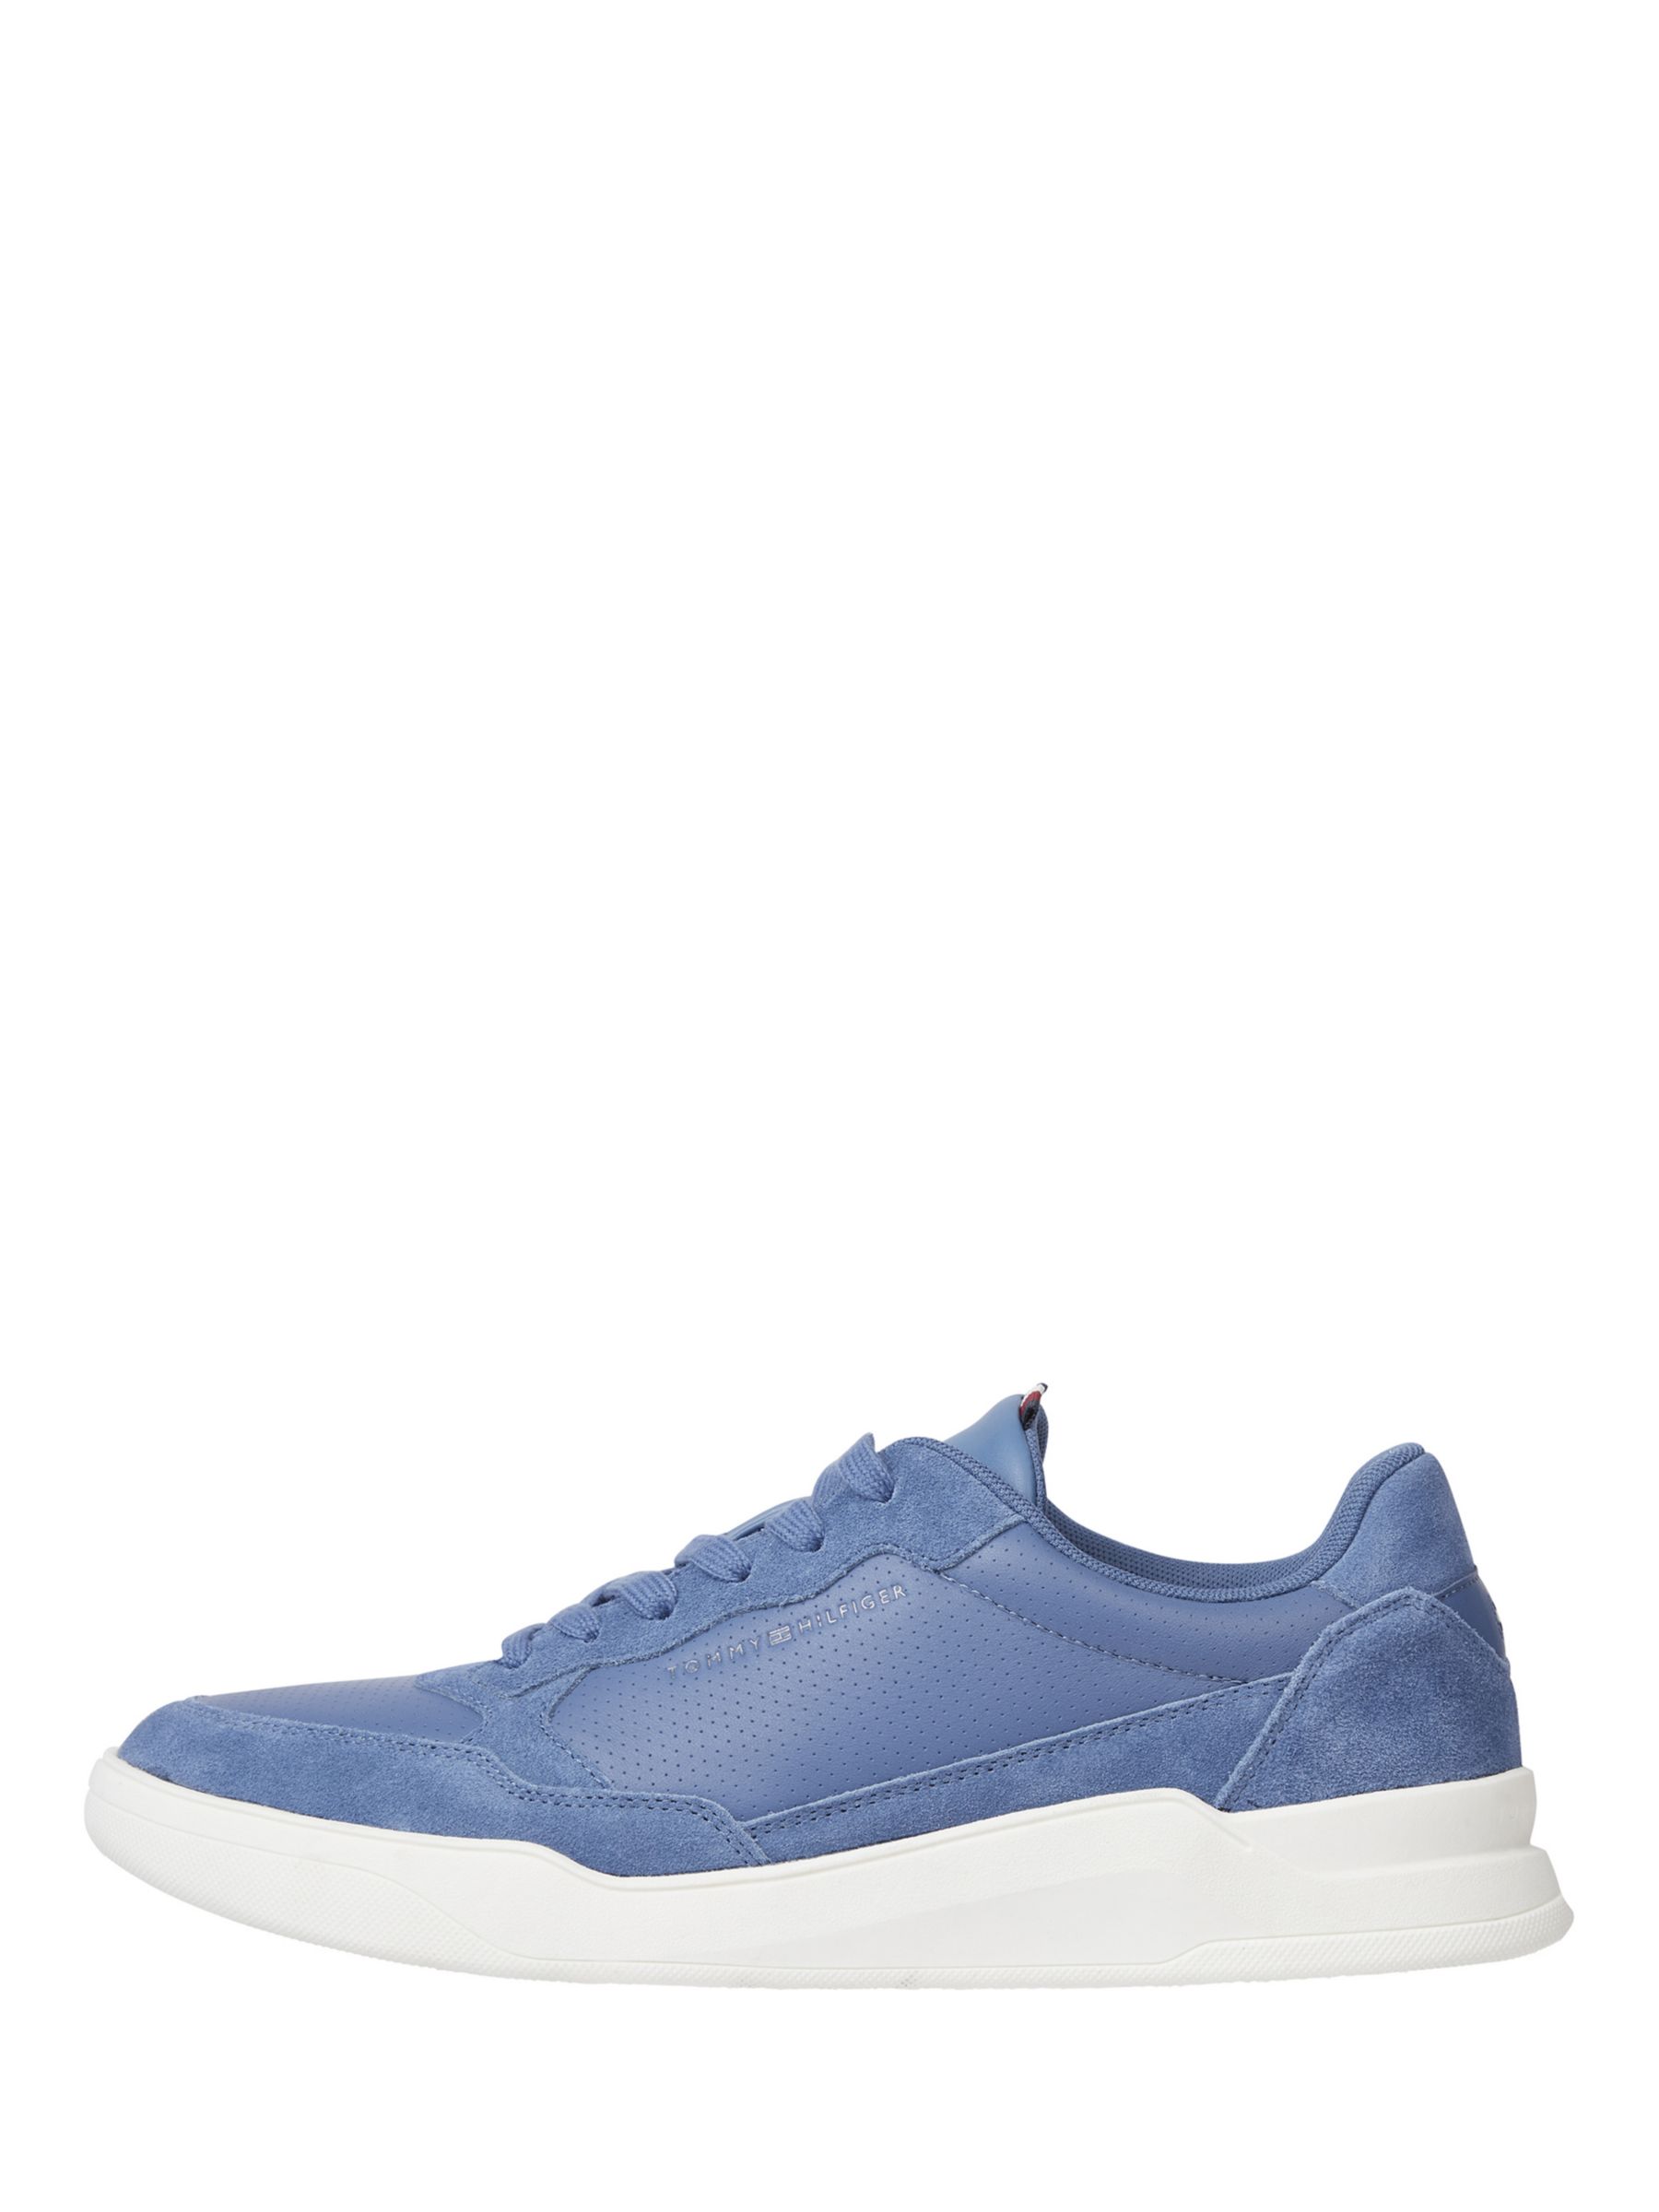 Tommy Hilfiger Leather Elevated Cupsole Lace Up Trainers, Blue